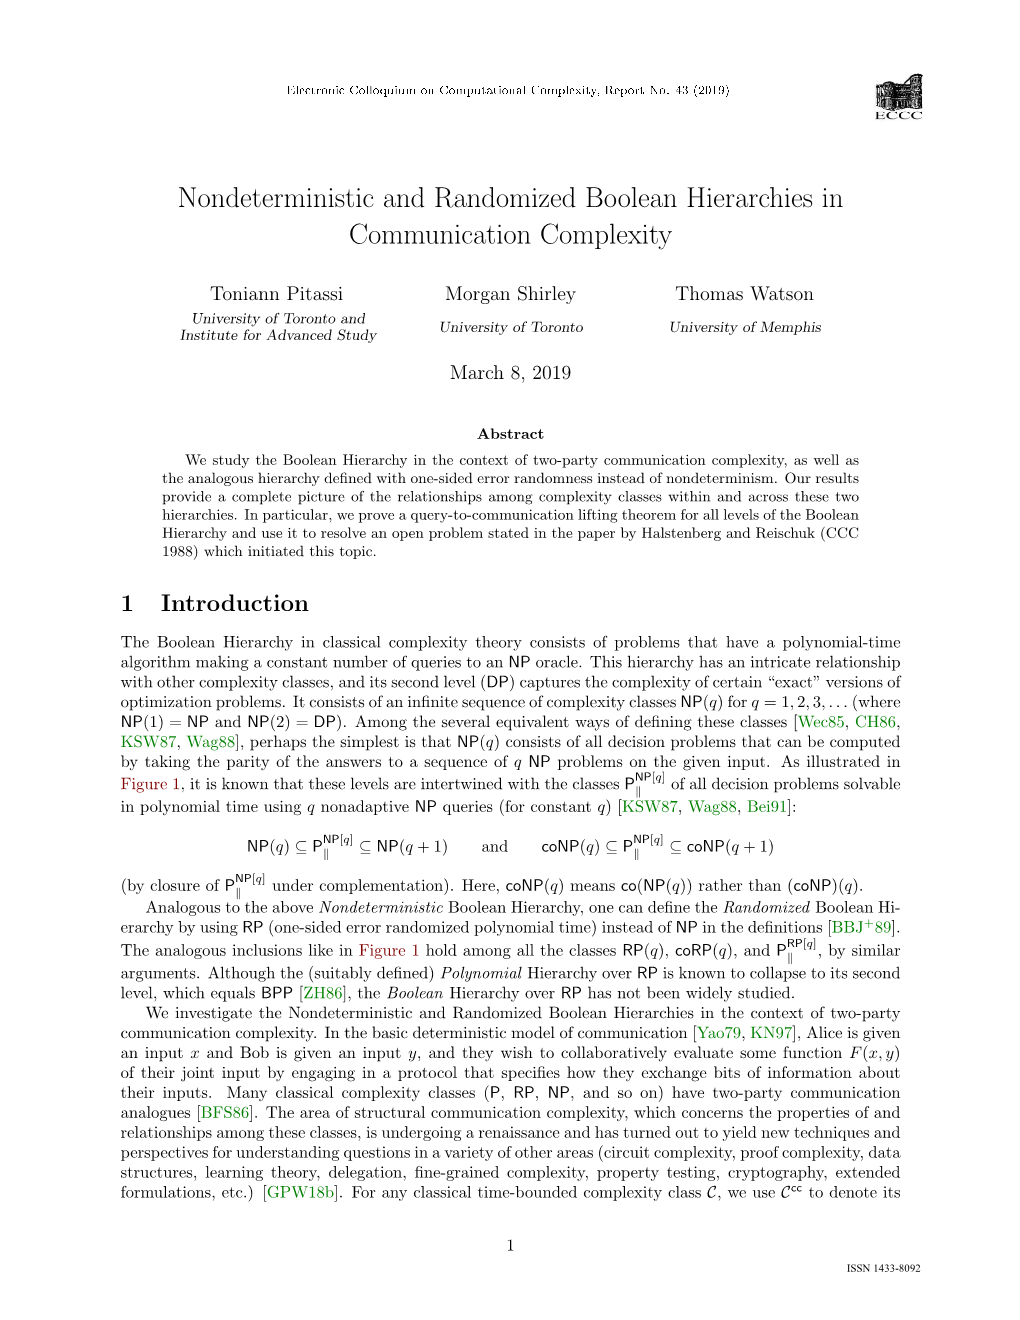 Nondeterministic and Randomized Boolean Hierarchies in Communication Complexity